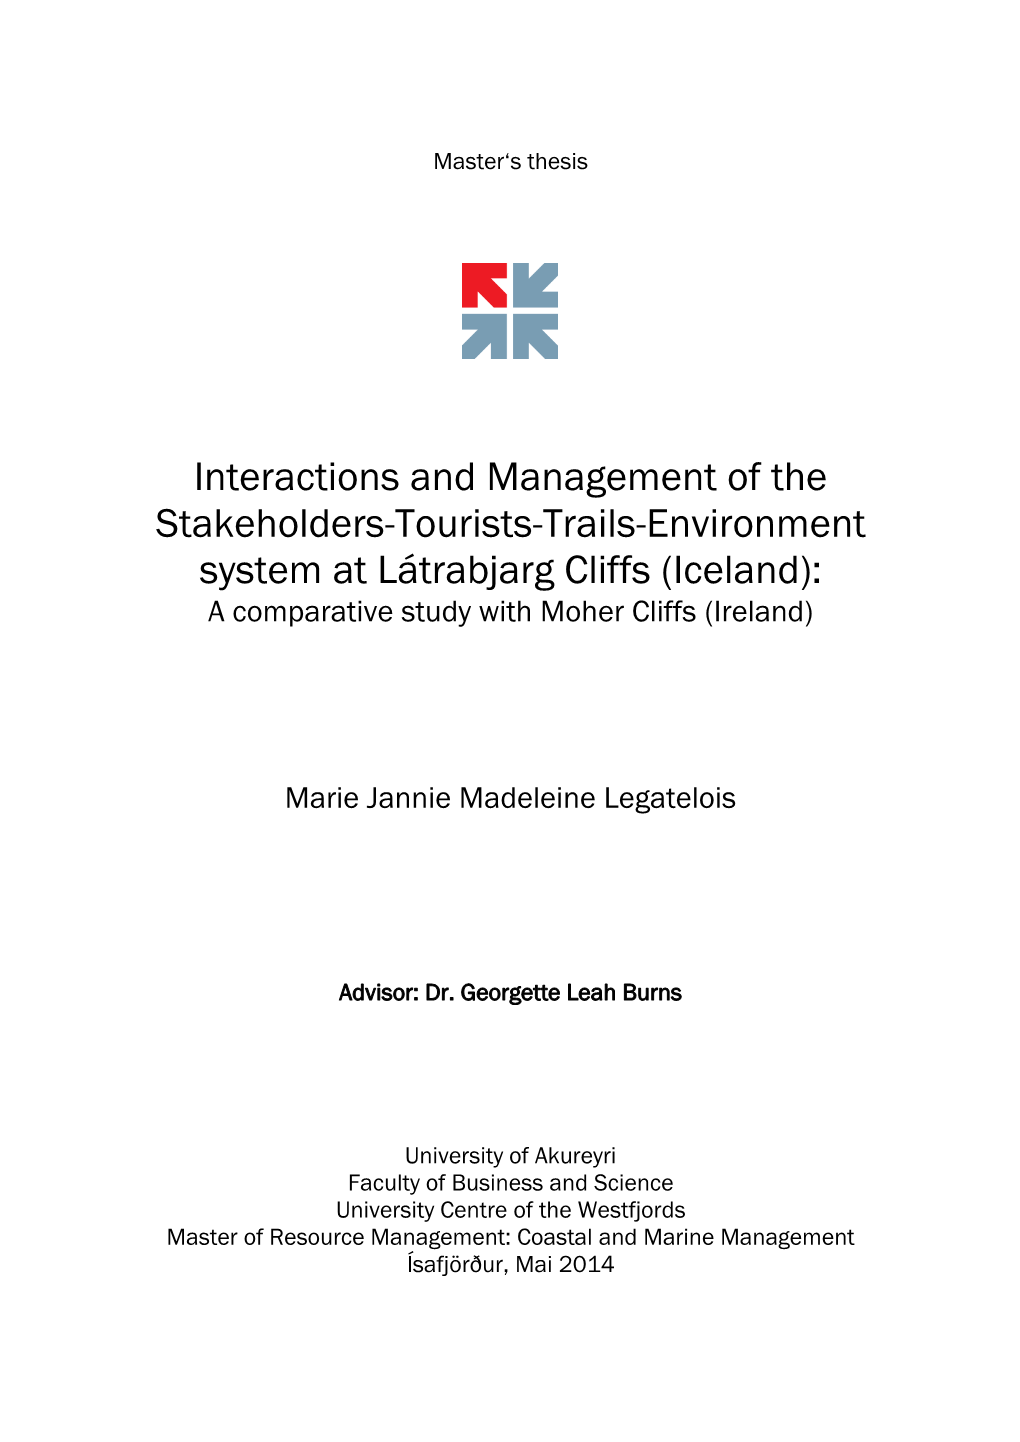 Interactions and Management of the Stakeholders-Tourists-Trails-Environment System at Látrabjarg Cliffs (Iceland): a Comparative Study with Moher Cliffs (Ireland)